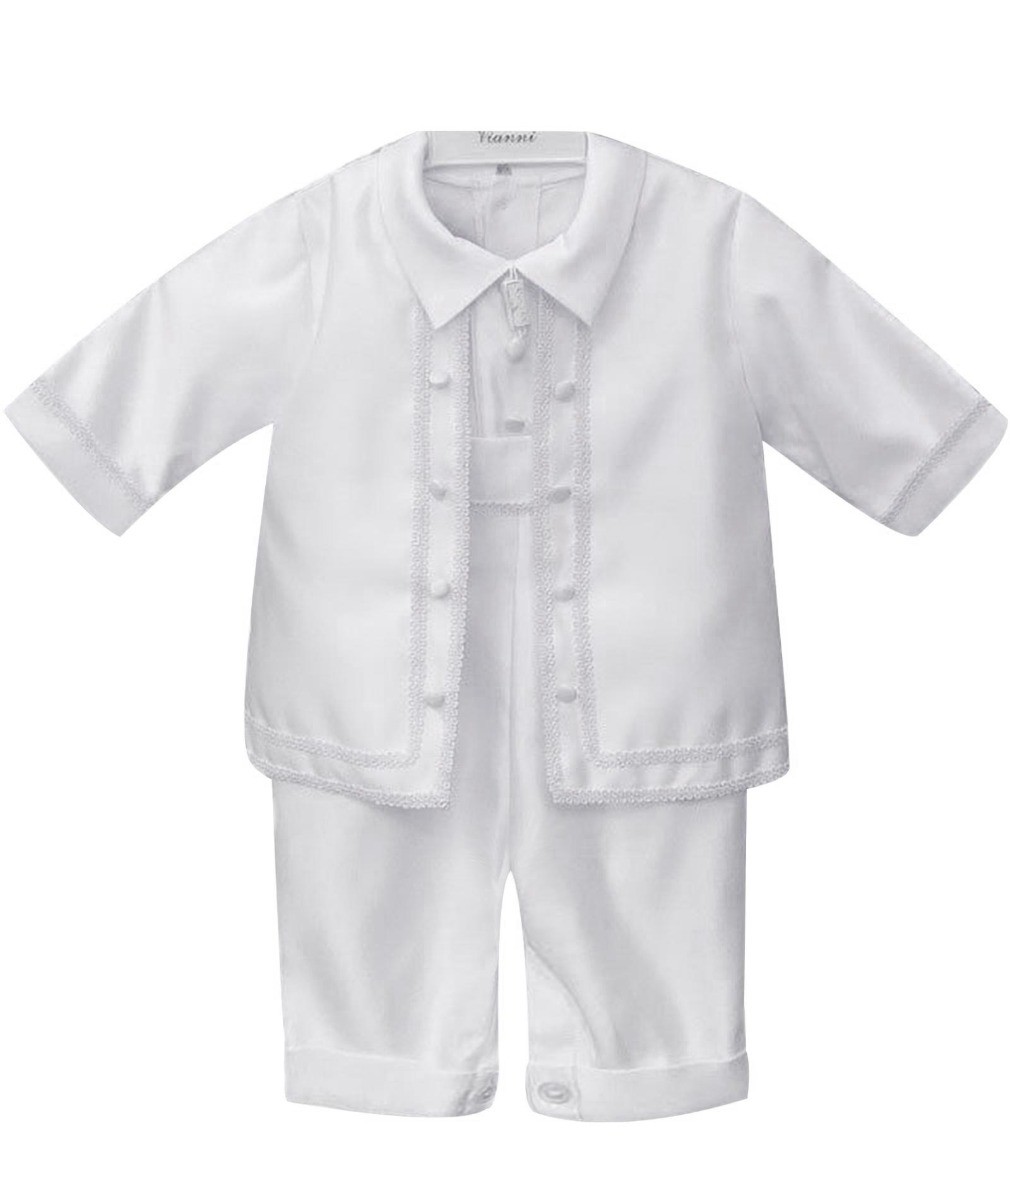 Baby Boys All In One Christening Suit - White